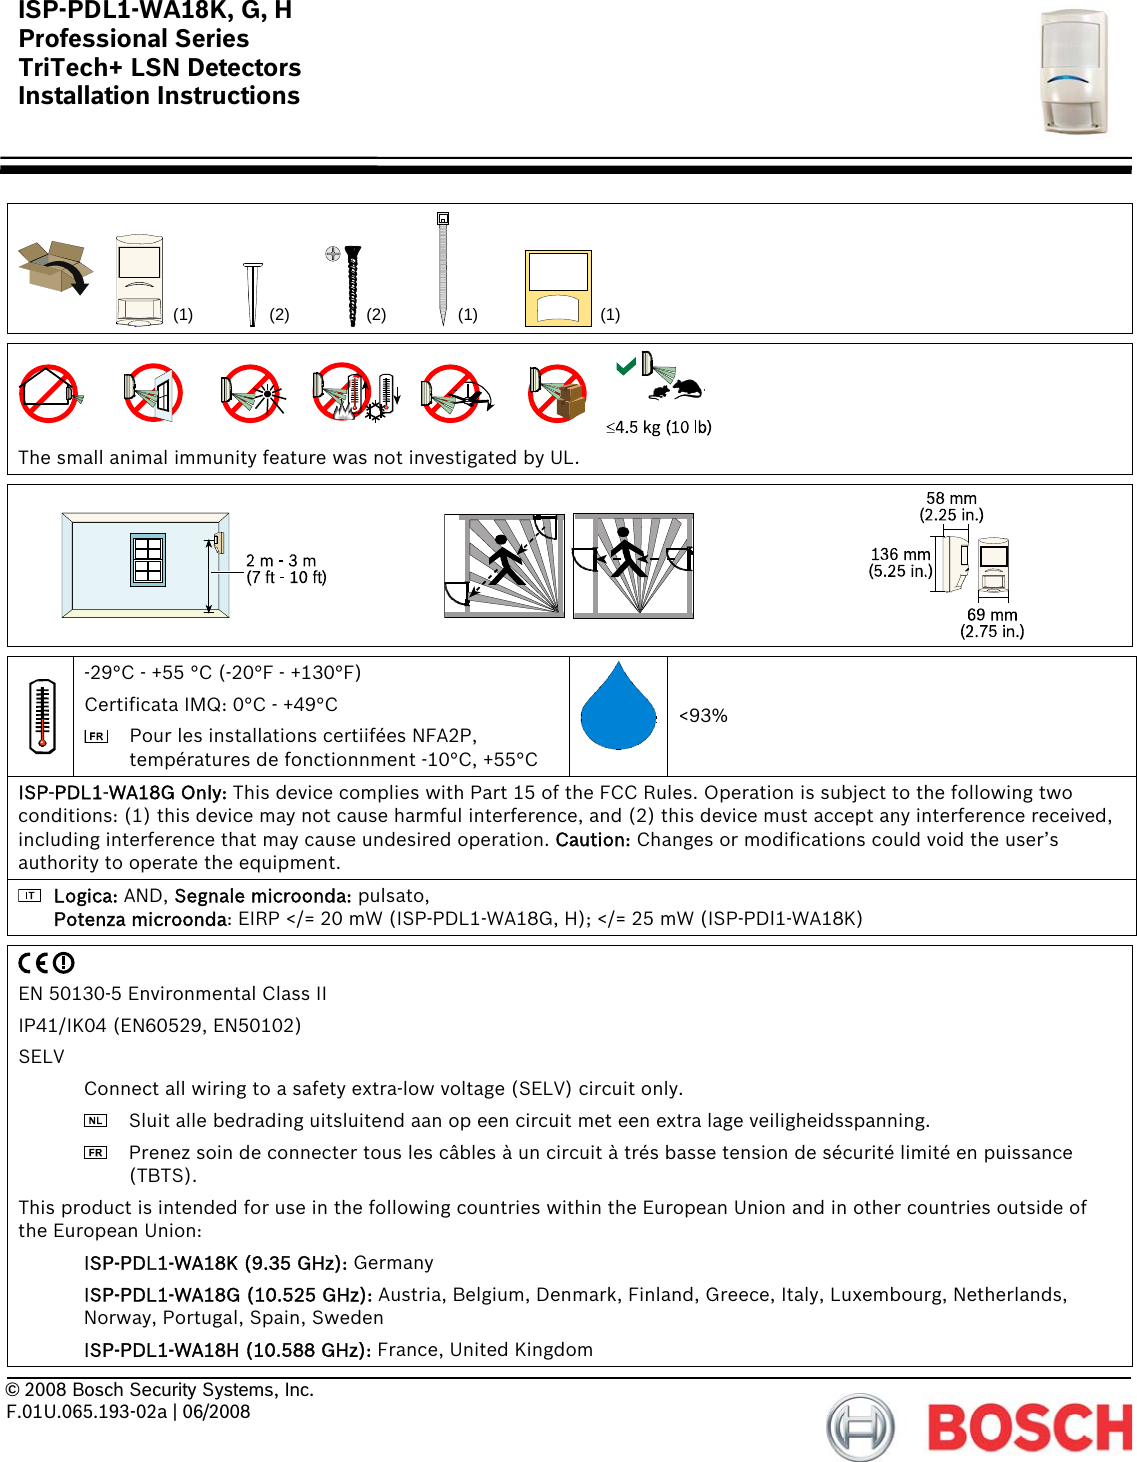 ISP-PDL1-WA18K, G, H Professional Series TriTech+ LSN Detectors Installation Instructions      © 2008 Bosch Security Systems, Inc. F.01U.065.193-02a | 06/2008     (1) (1)(2)(2) (1)    The small animal immunity feature was not investigated by UL.       -29°C - +55 °C (-20°F - +130°F) Certificata IMQ: 0°C - +49°C   Pour les installations certiifées NFA2P, températures de fonctionnment -10°C, +55°C &lt;93% ISP-PDL1-WA18G Only: This device complies with Part 15 of the FCC Rules. Operation is subject to the following two conditions: (1) this device may not cause harmful interference, and (2) this device must accept any interference received, including interference that may cause undesired operation. Caution: Changes or modifications could void the user’s authority to operate the equipment.  Logica: AND, Segnale microonda: pulsato, Potenza microonda: EIRP &lt;/= 20 mW (ISP-PDL1-WA18G, H); &lt;/= 25 mW (ISP-PDl1-WA18K)   EN 50130-5 Environmental Class II IP41/IK04 (EN60529, EN50102) SELV   Connect all wiring to a safety extra-low voltage (SELV) circuit only.    Sluit alle bedrading uitsluitend aan op een circuit met een extra lage veiligheidsspanning.    Prenez soin de connecter tous les câbles à un circuit à trés basse tension de sécurité limité en puissance (TBTS). This product is intended for use in the following countries within the European Union and in other countries outside of the European Union:  ISP-PDL1-WA18K (9.35 GHz): Germany  ISP-PDL1-WA18G (10.525 GHz): Austria, Belgium, Denmark, Finland, Greece, Italy, Luxembourg, Netherlands, Norway, Portugal, Spain, Sweden  ISP-PDL1-WA18H (10.588 GHz): France, United Kingdom 